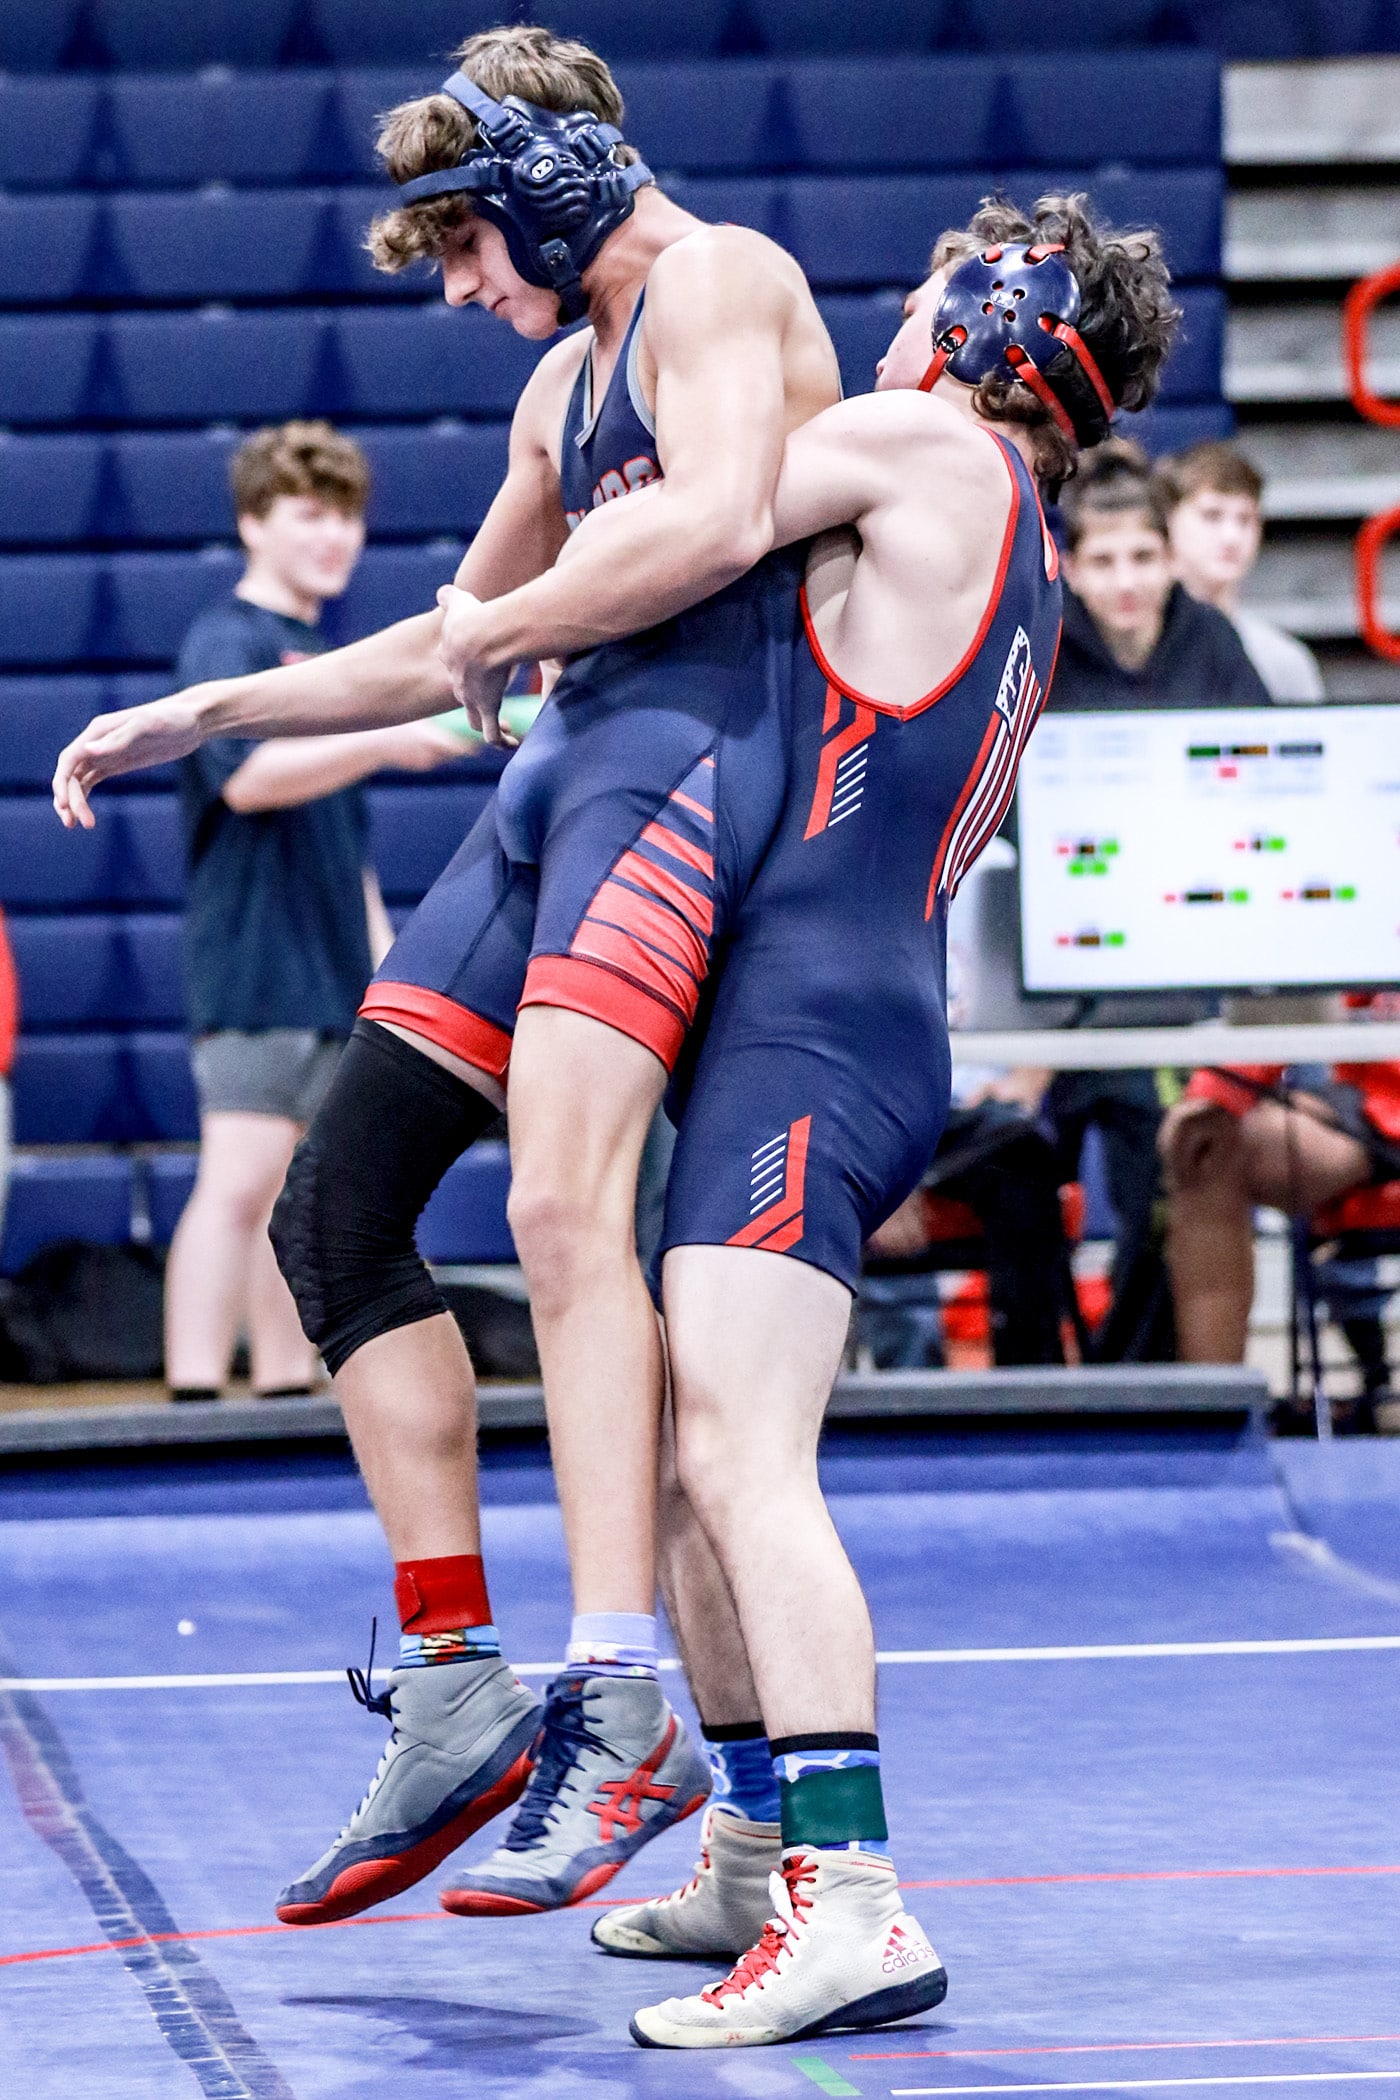 1/6/23 Friday afternoon Eagles Wrestler Josh in a match against Fivay in the District Duels. Photos by Cheryl Clanton.